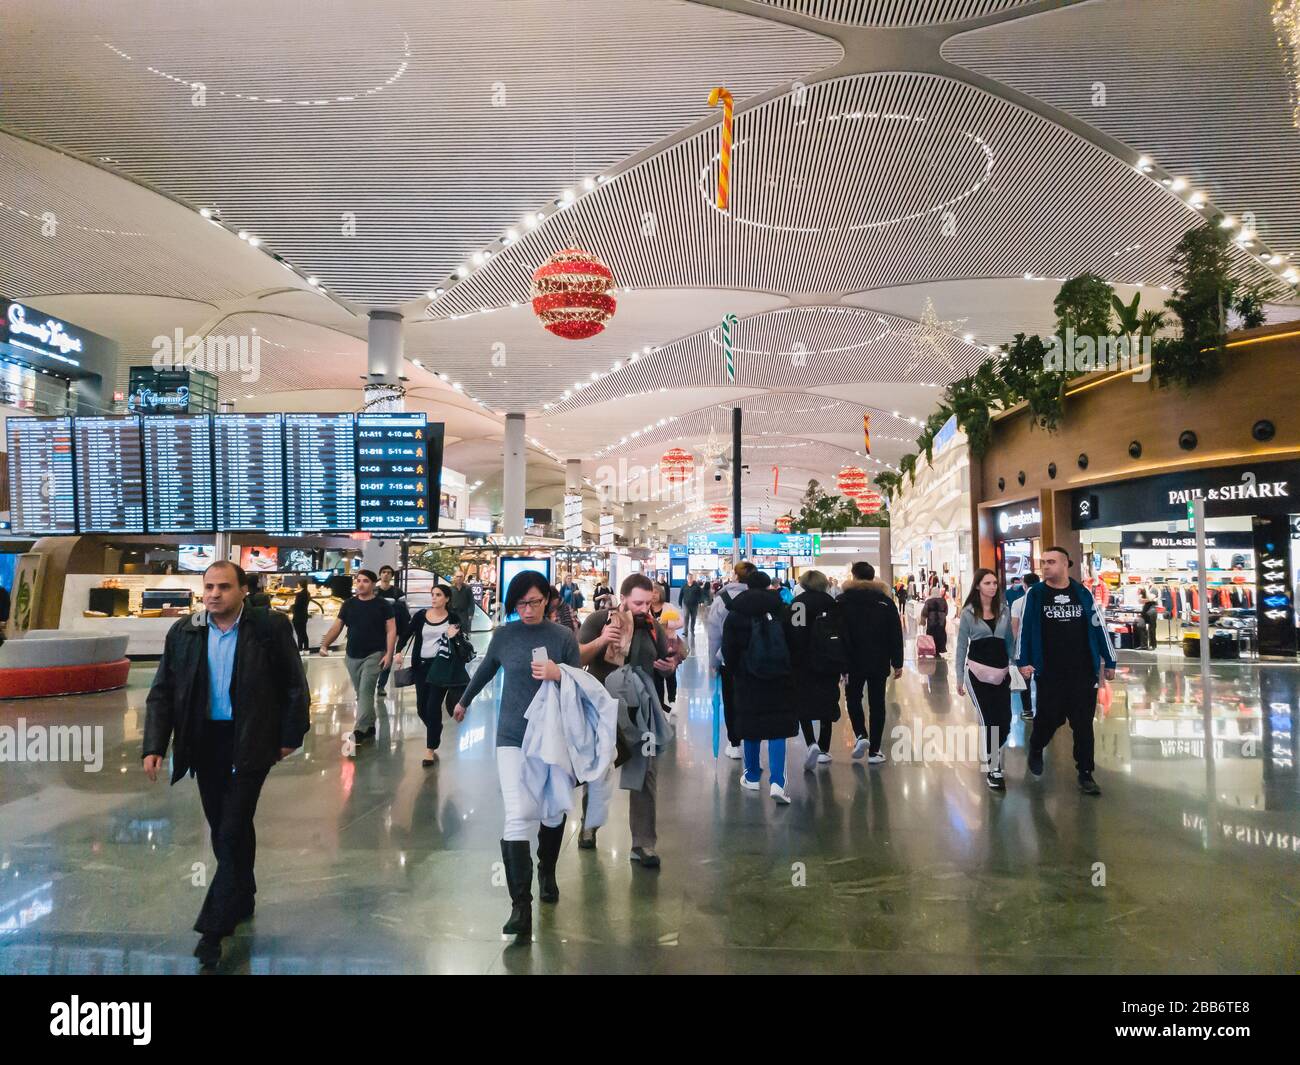 Istanbul, Turkey - February, 11 2020: Passengers in the departure hall of IGA Istanbul Airport terminal, going to the gates. Christmas decoration Stock Photo